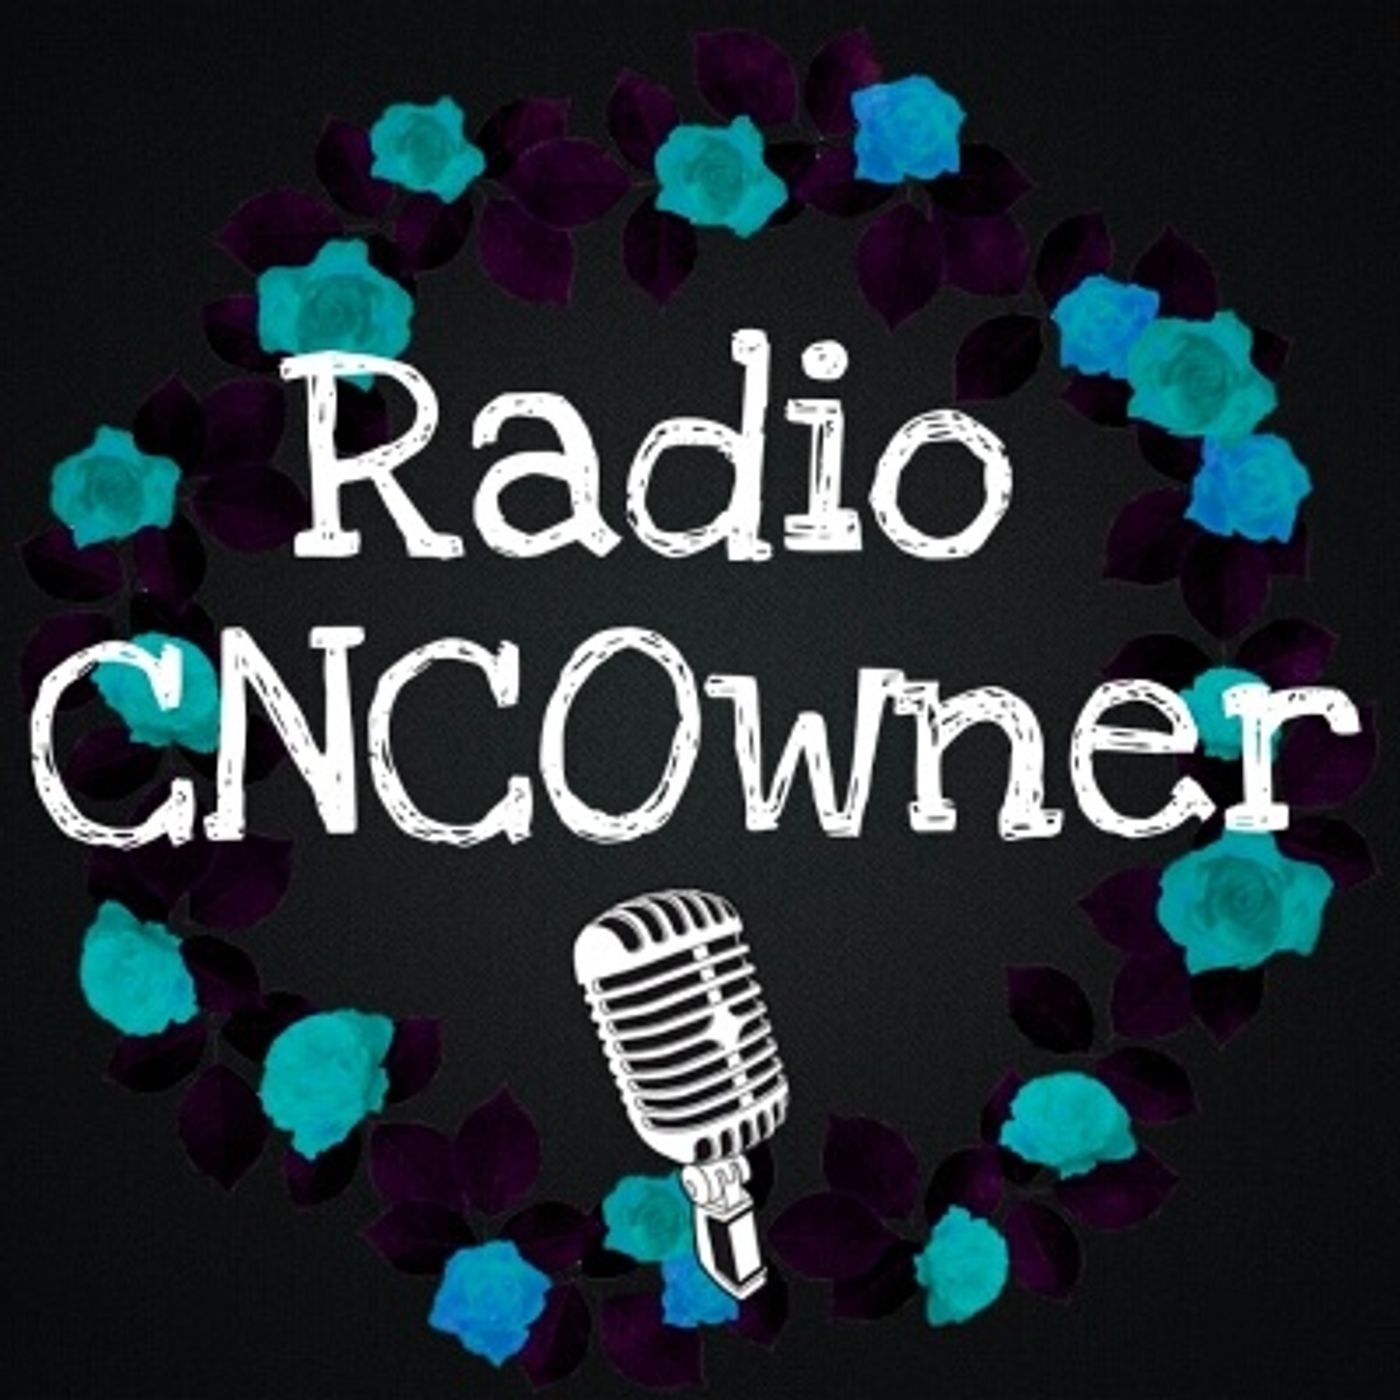 RadioCNCOwner's show